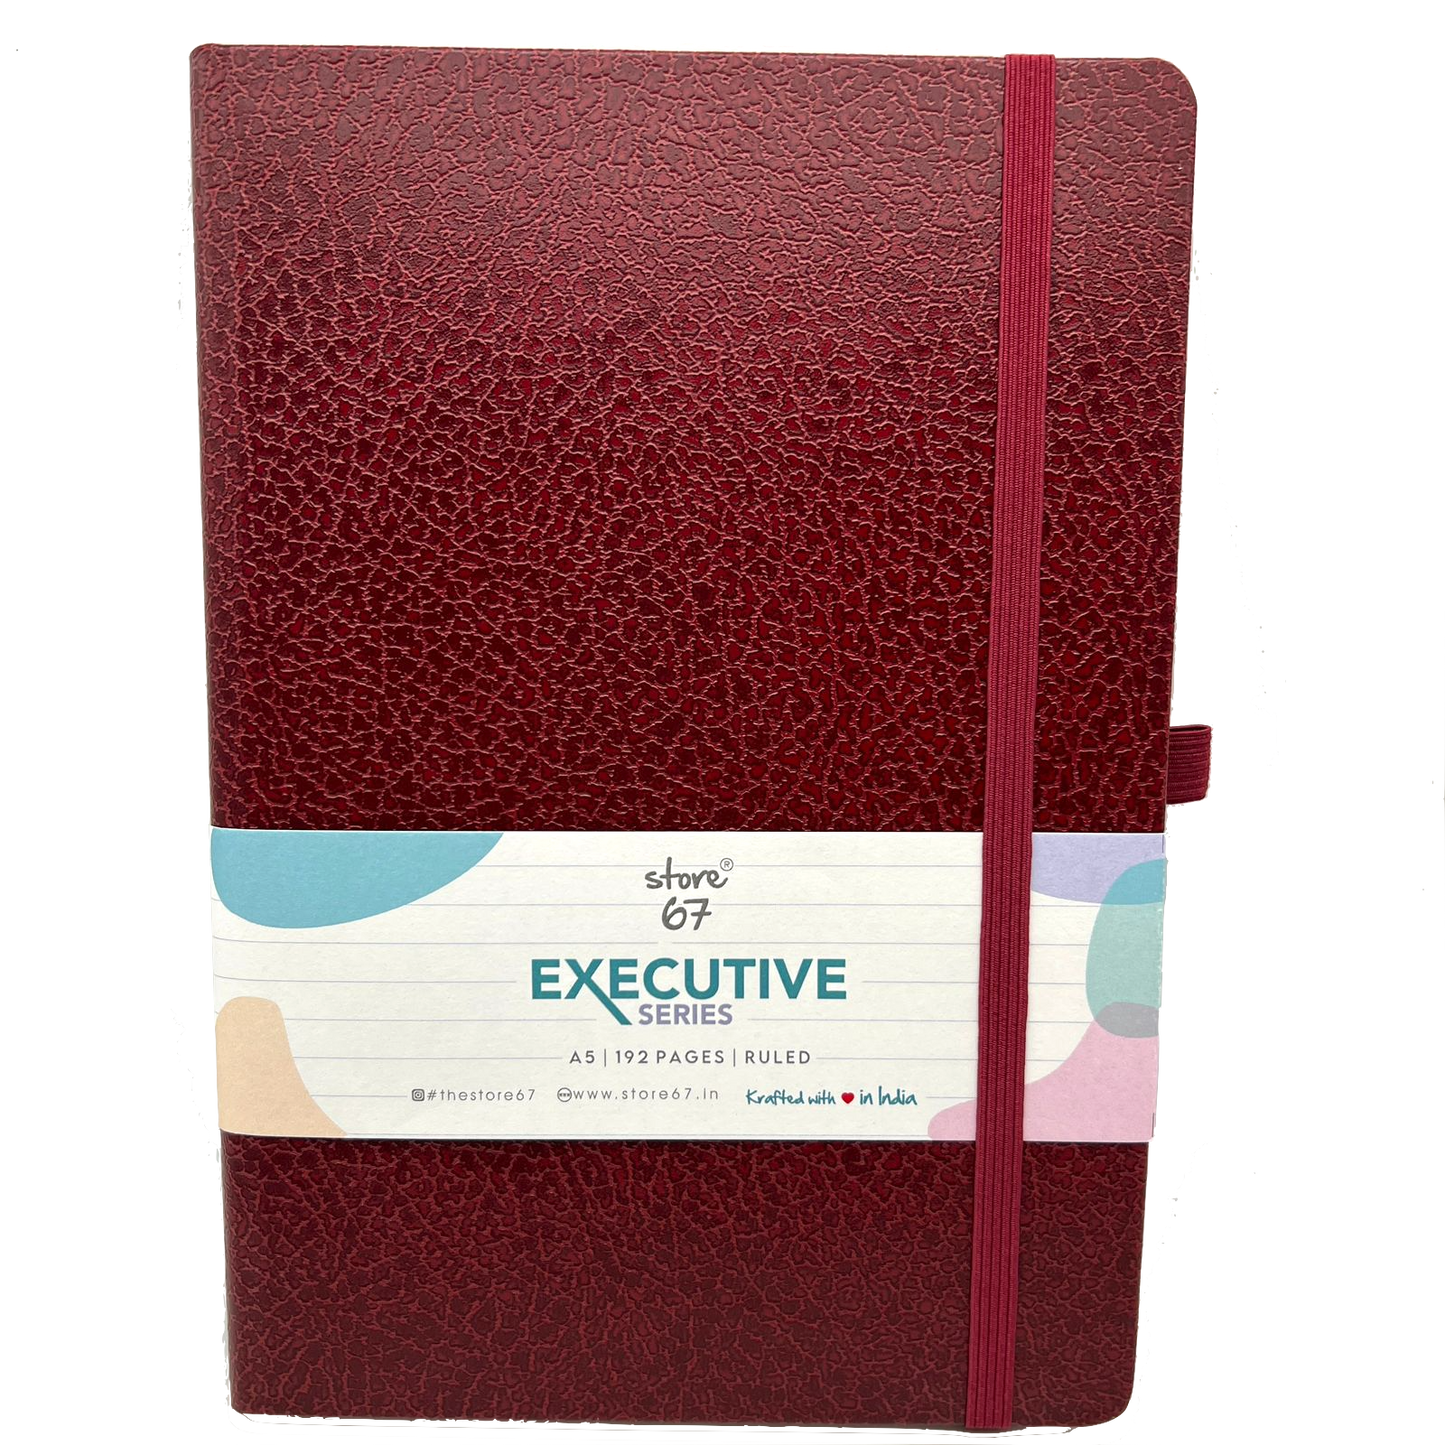 Executive series - Red single ruled